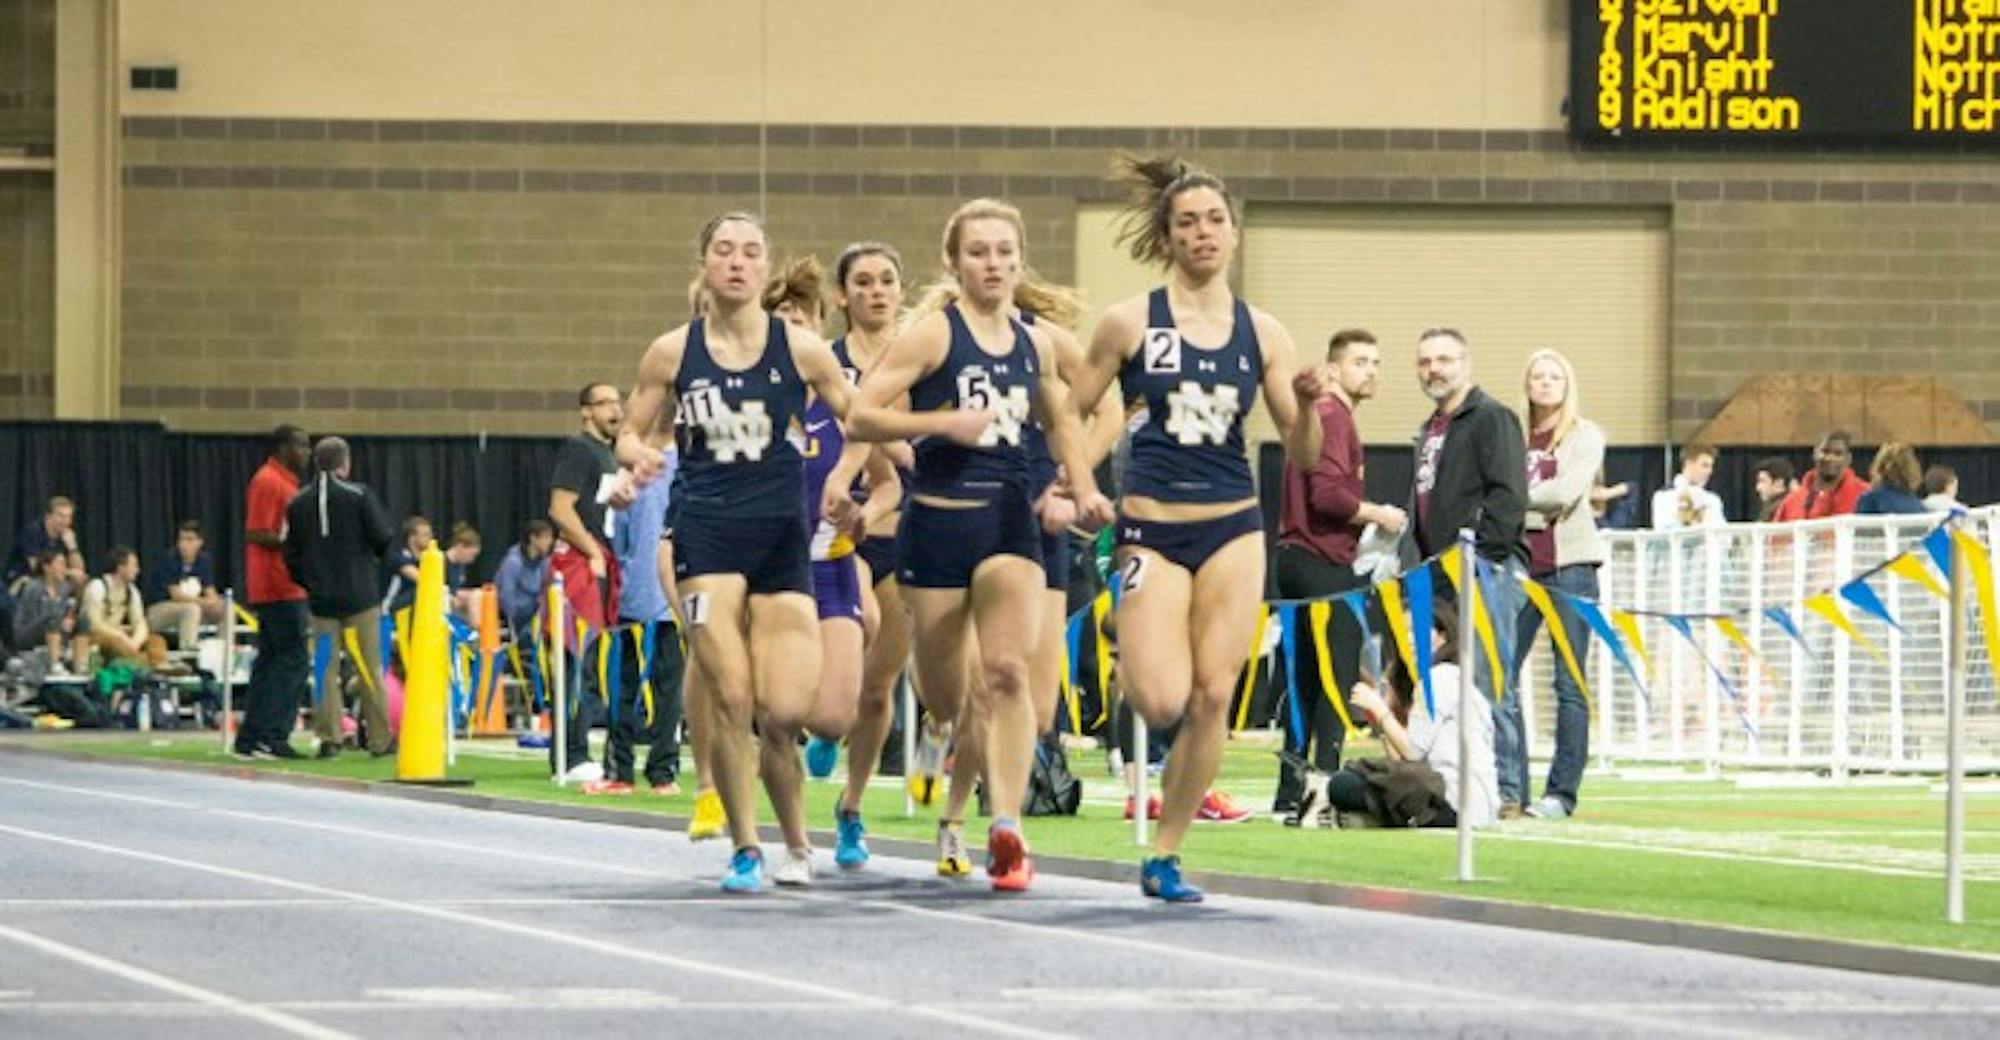 Irish sophomore Jessica Harris, 2, leads the pack during the 800-meter run at the Alex Wilson Invitational at Loftus Sports Center on Feb. 20. Harris broke the school record in the 800-meter run Friday.